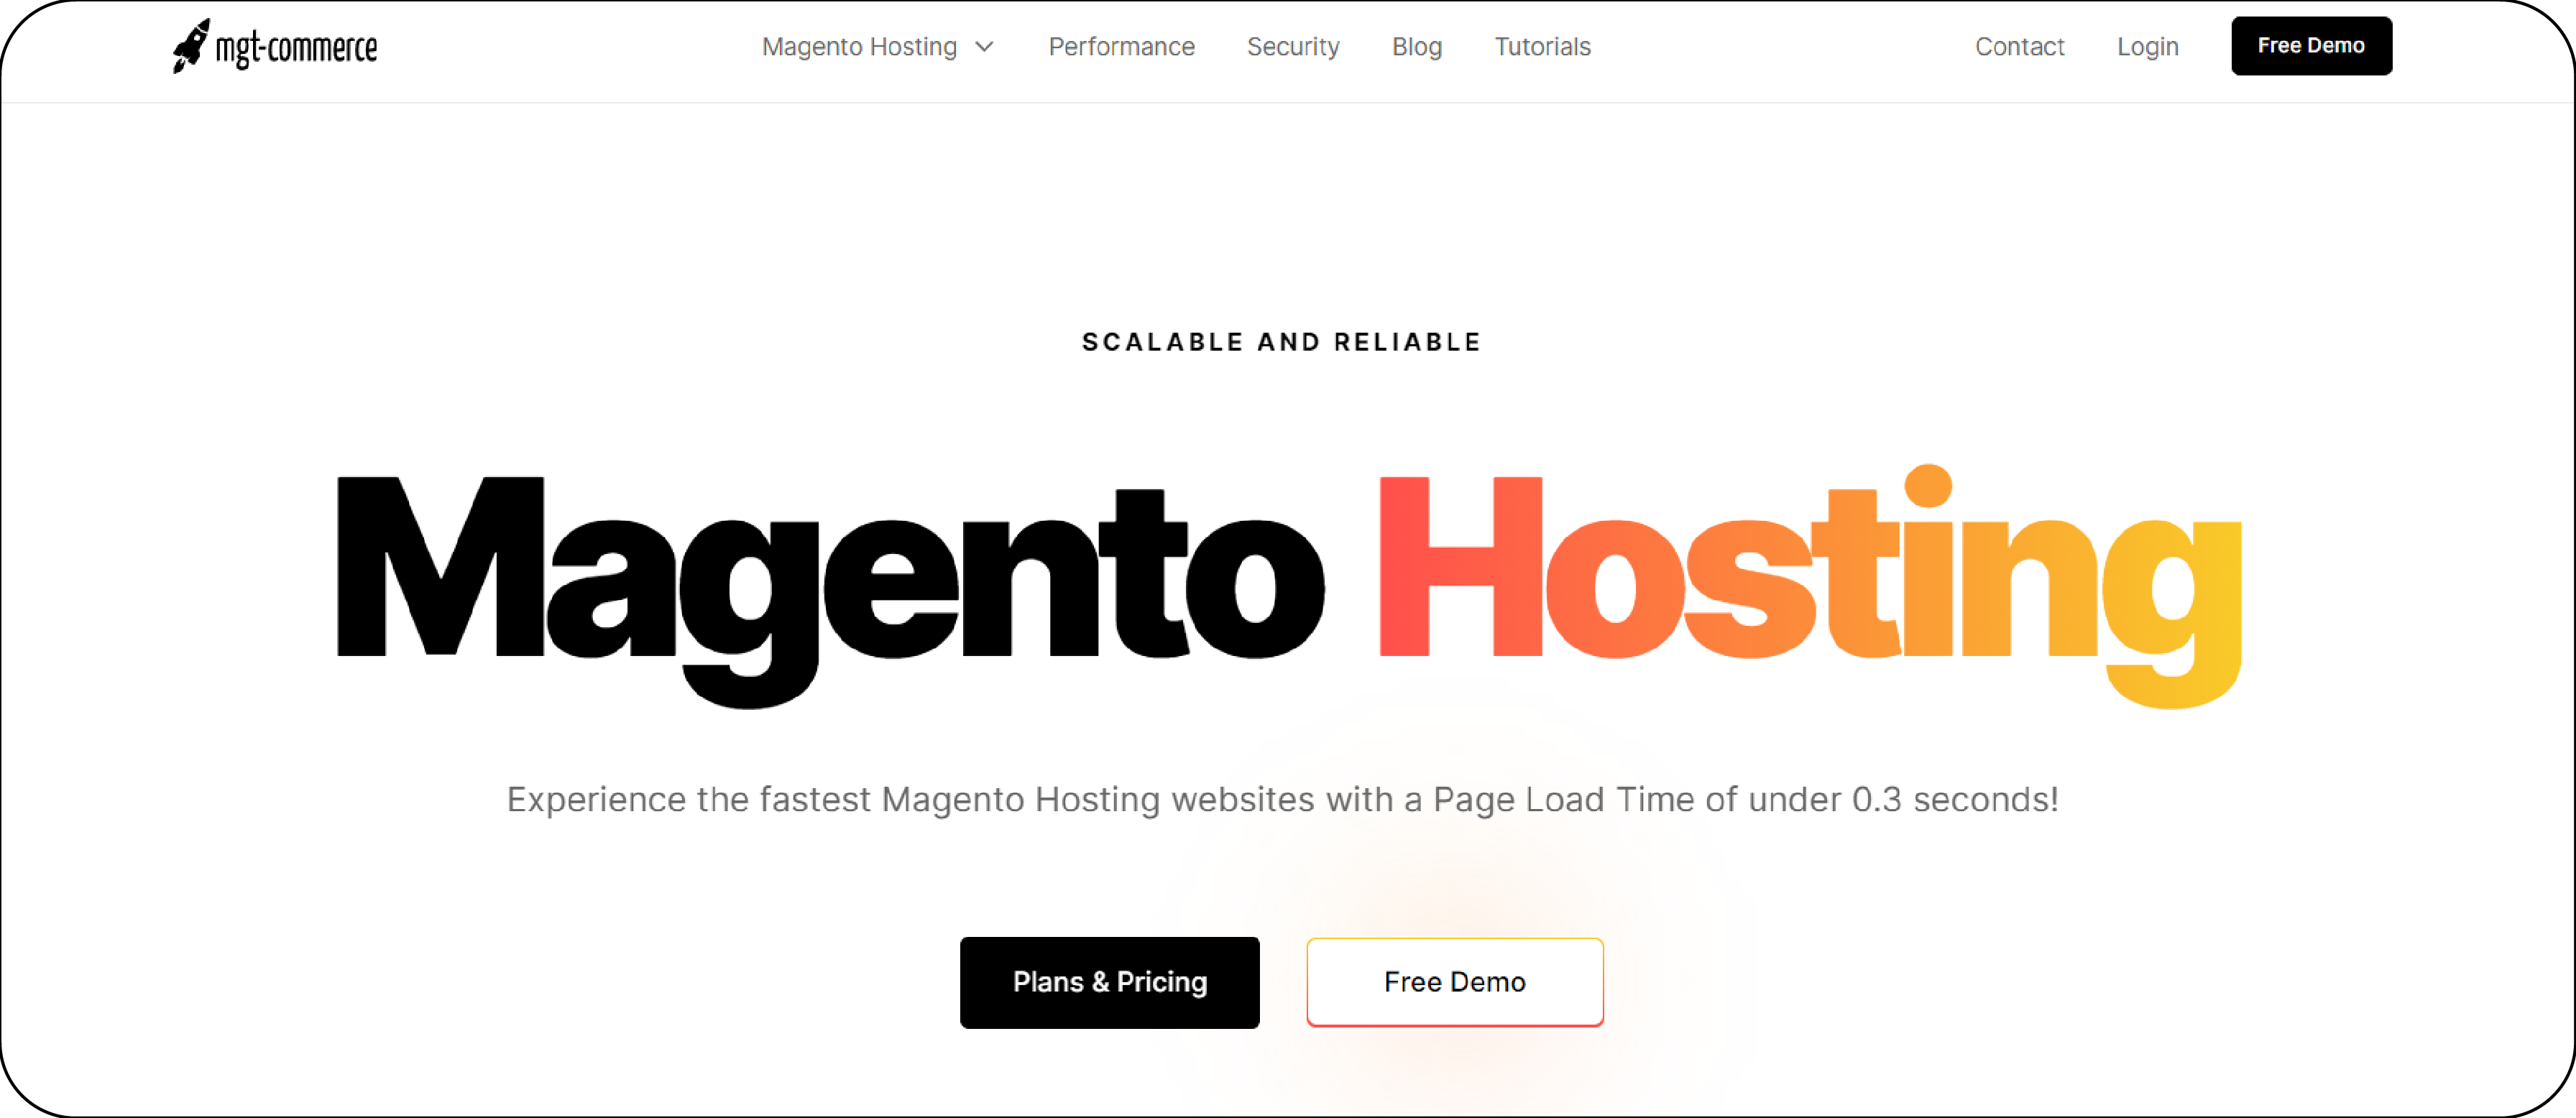 MGT Commerce hosting solution showcasing its features for Magento 2 stores